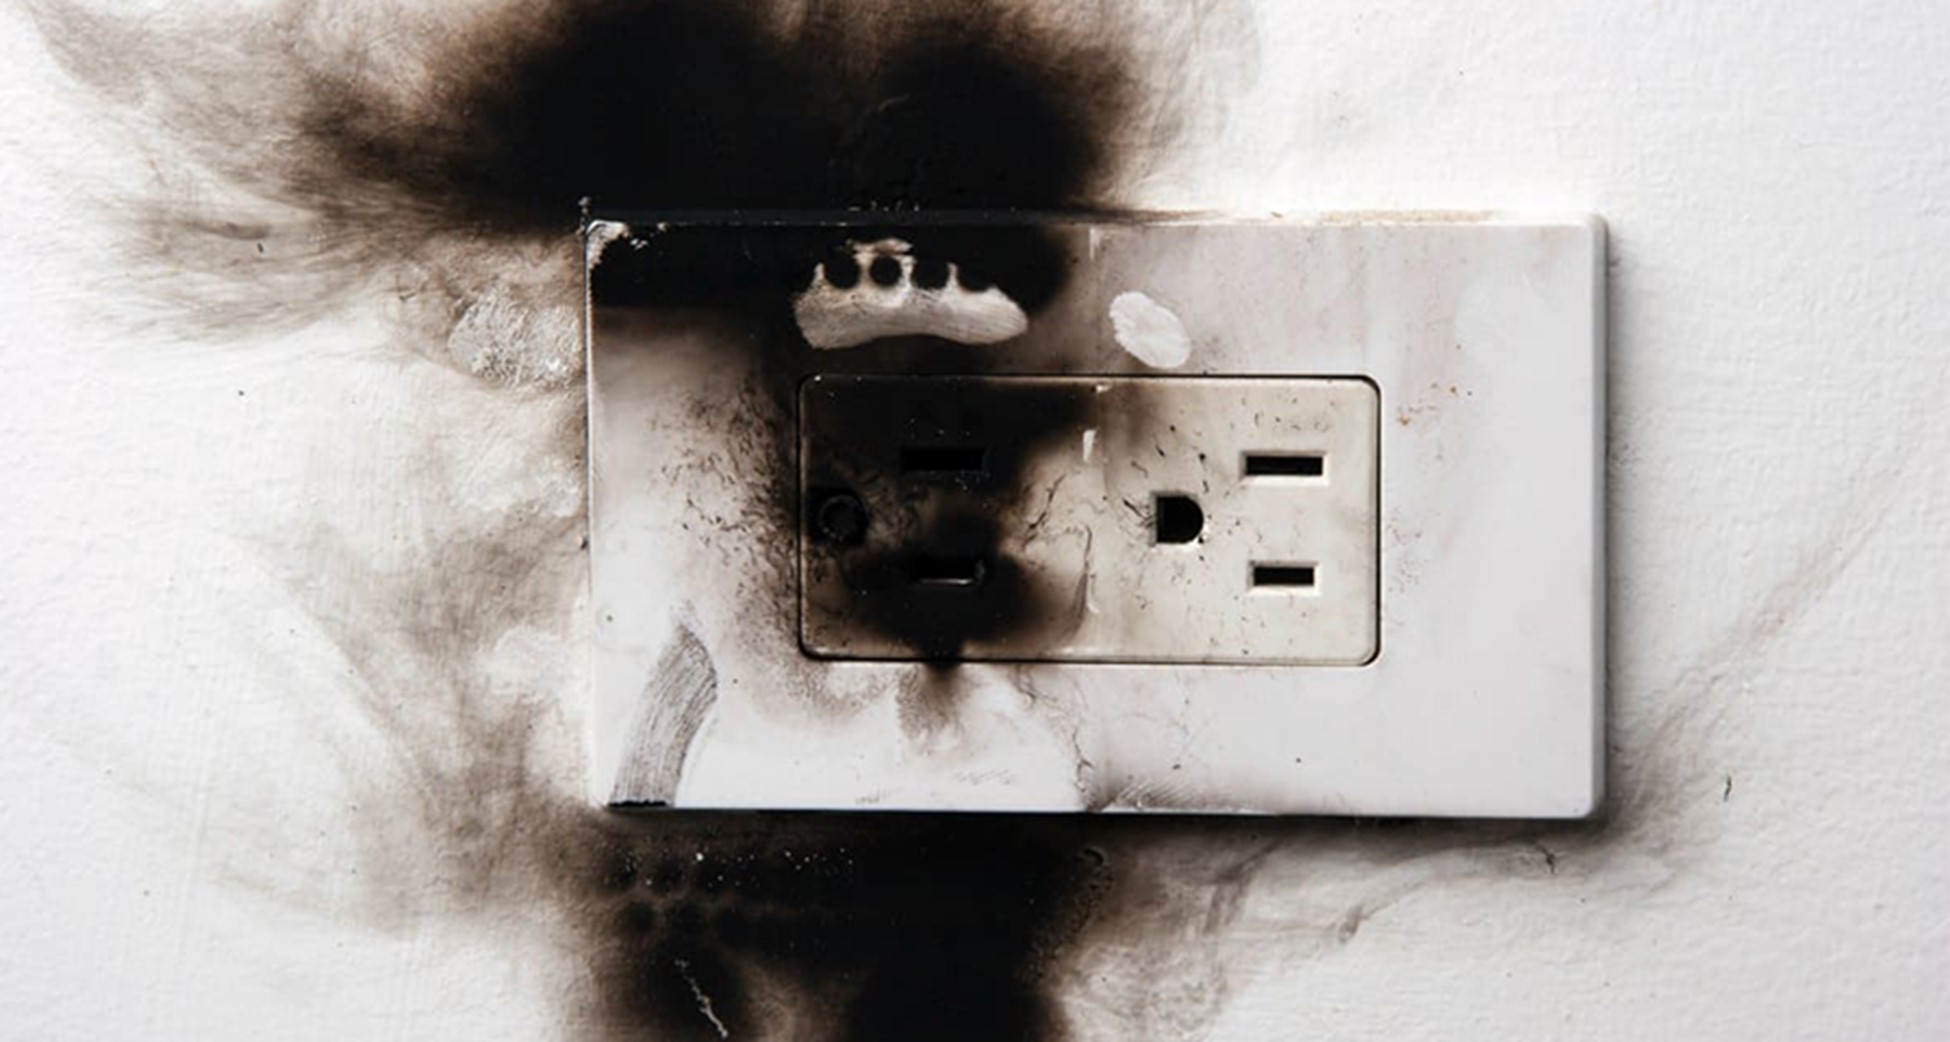 How to Spot Electrical Fire Hazards